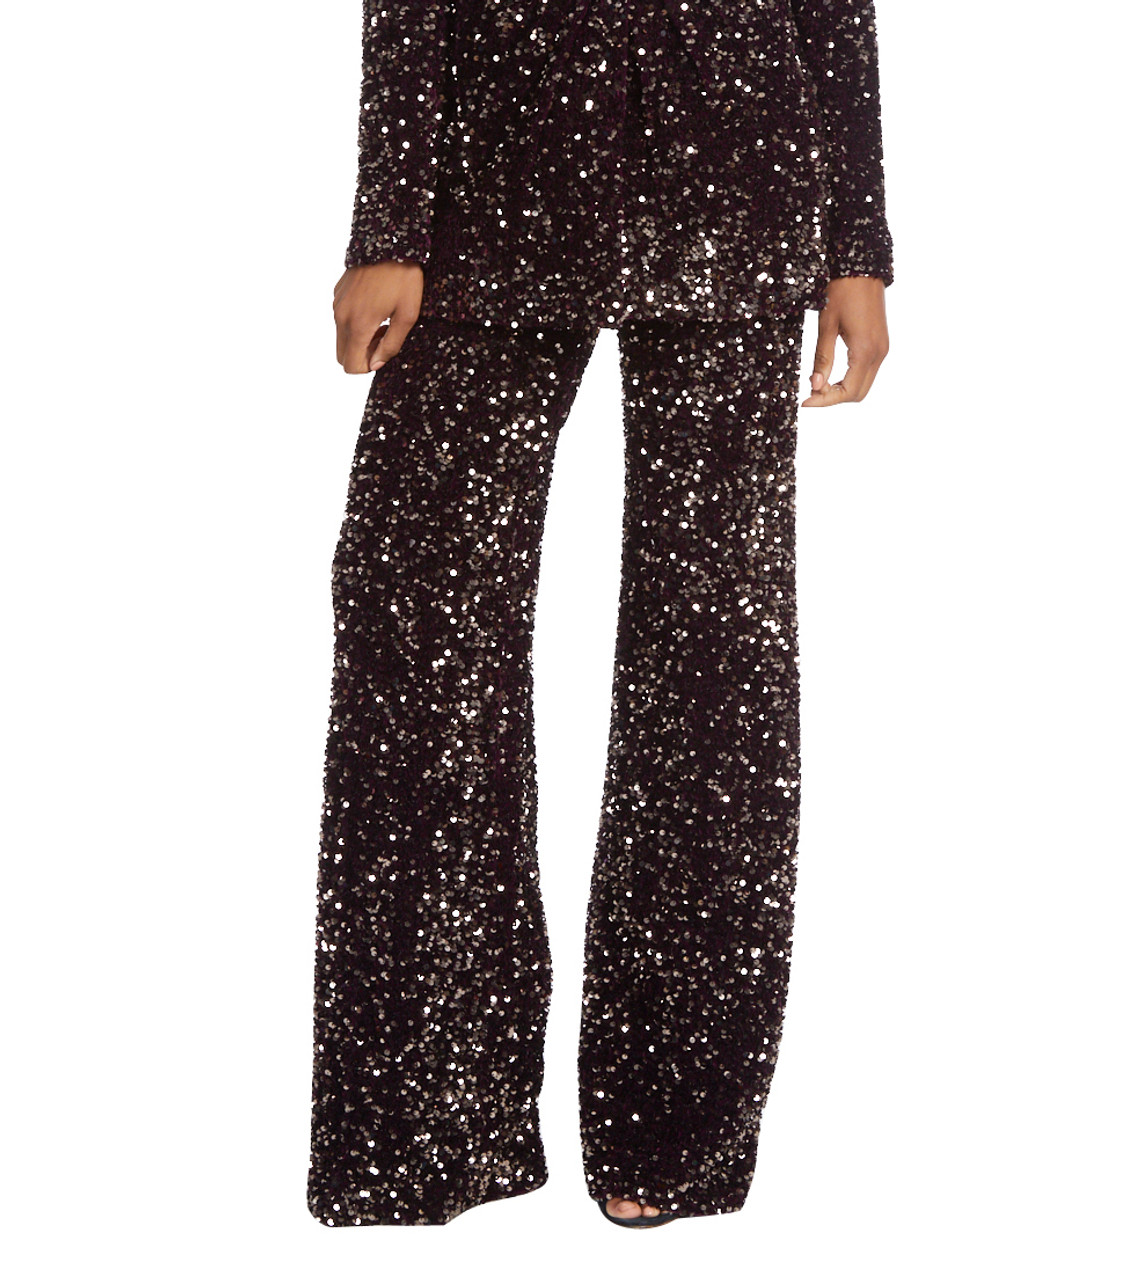 The Sequin Pants You Need For Your Next Party + 20 Other Sequin Pieces To  Die For With Express - STYLETHEGIRL